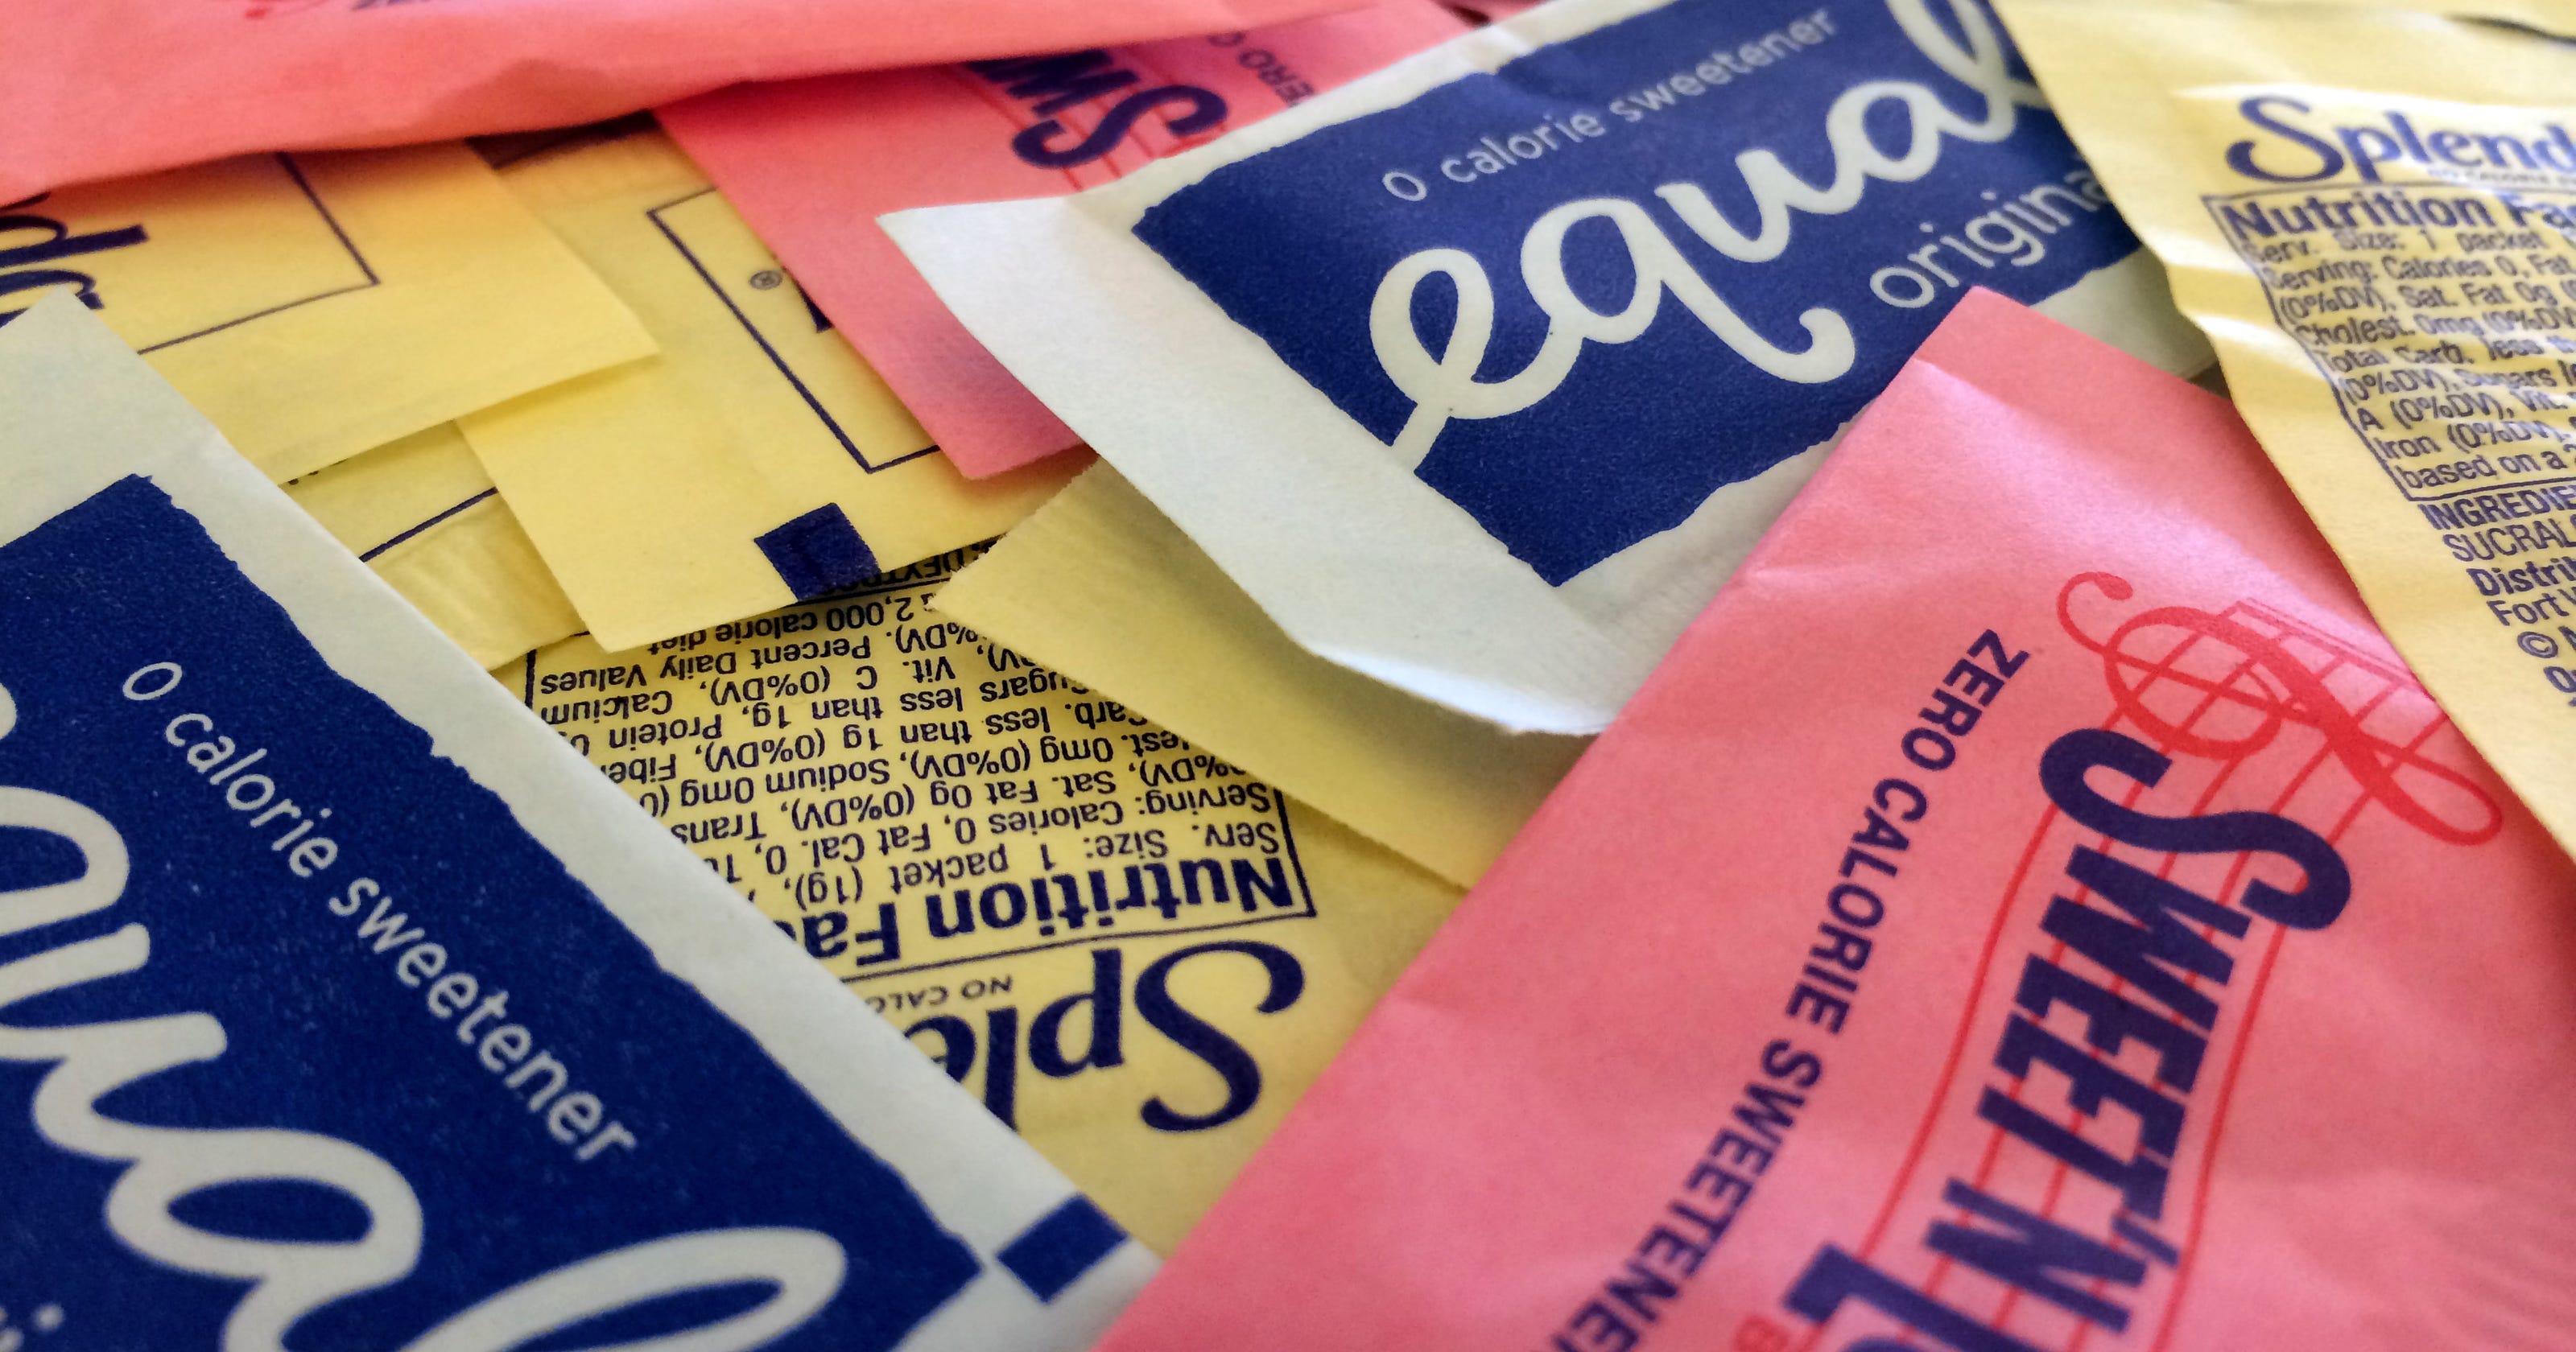 Artificial sweeteners may lead to diabetes